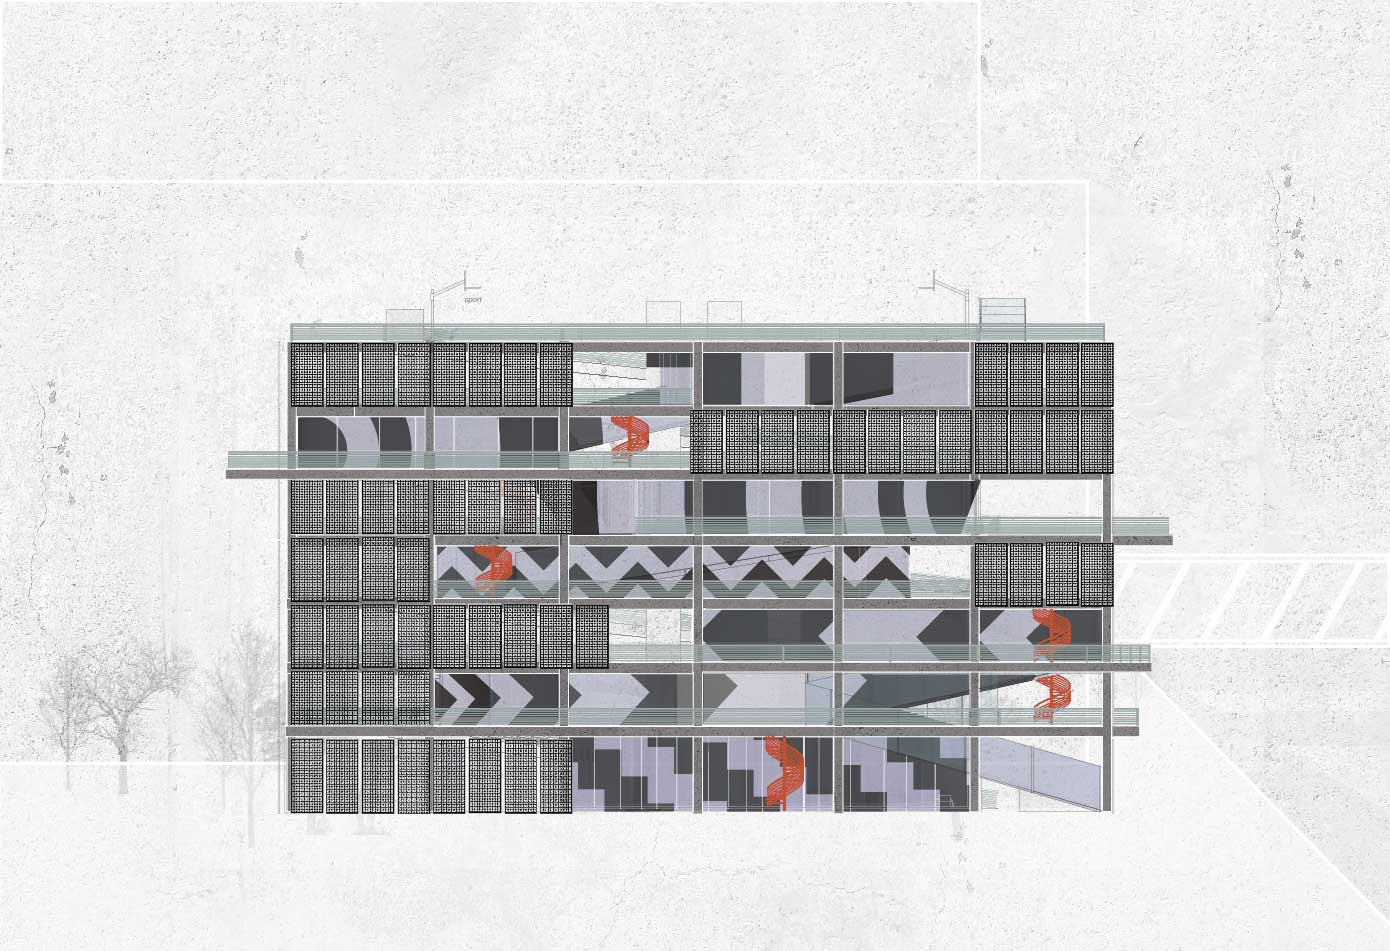 An elevation rendering of the floors of a building